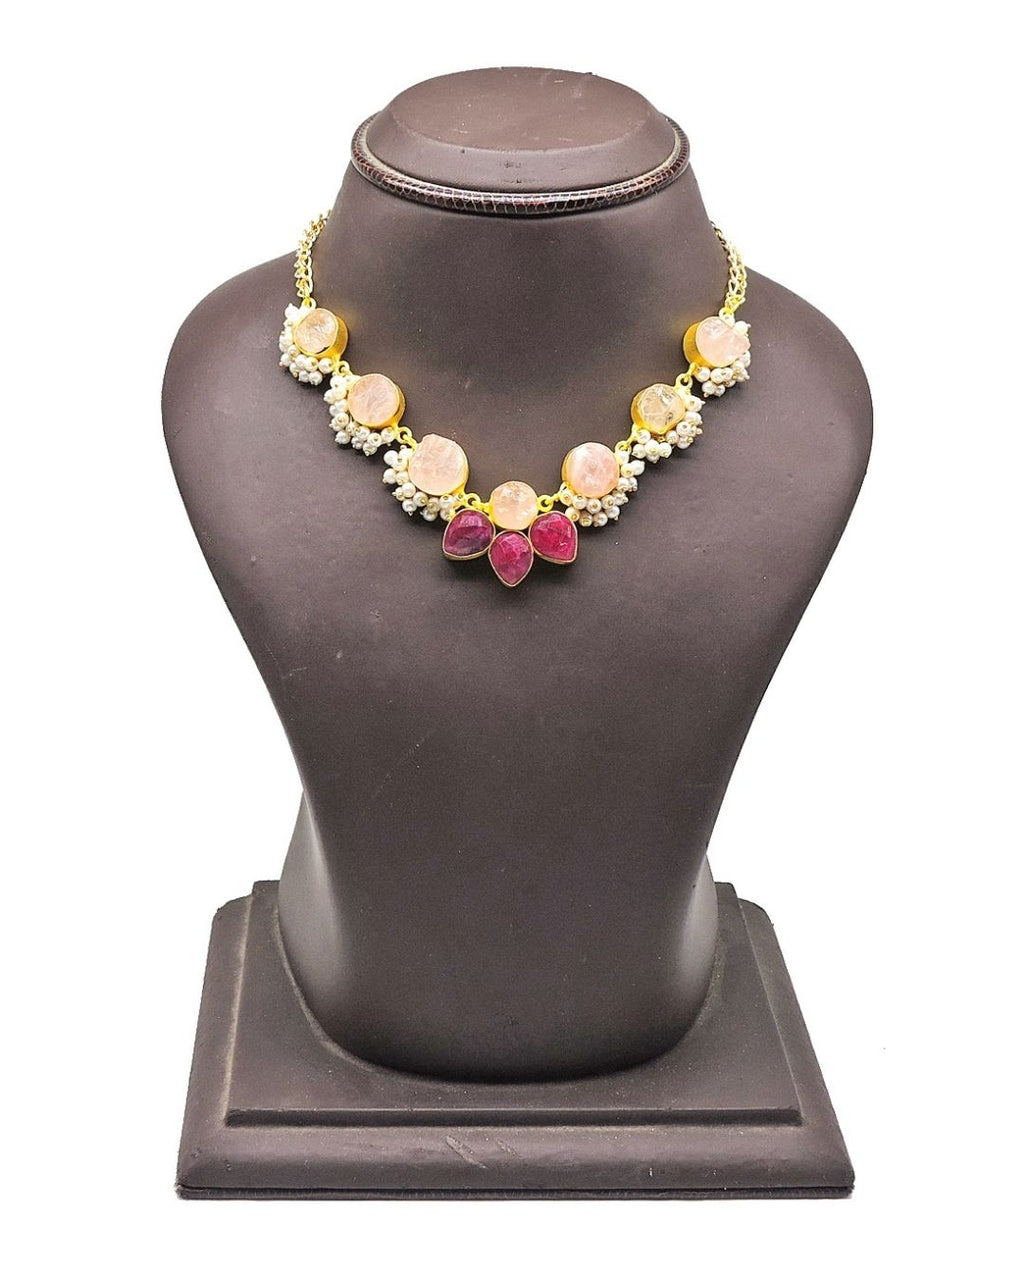 Kendall Choker - Necklaces - Handcrafted Jewellery - Made in India - Dubai Jewellery, Fashion & Lifestyle - Dori